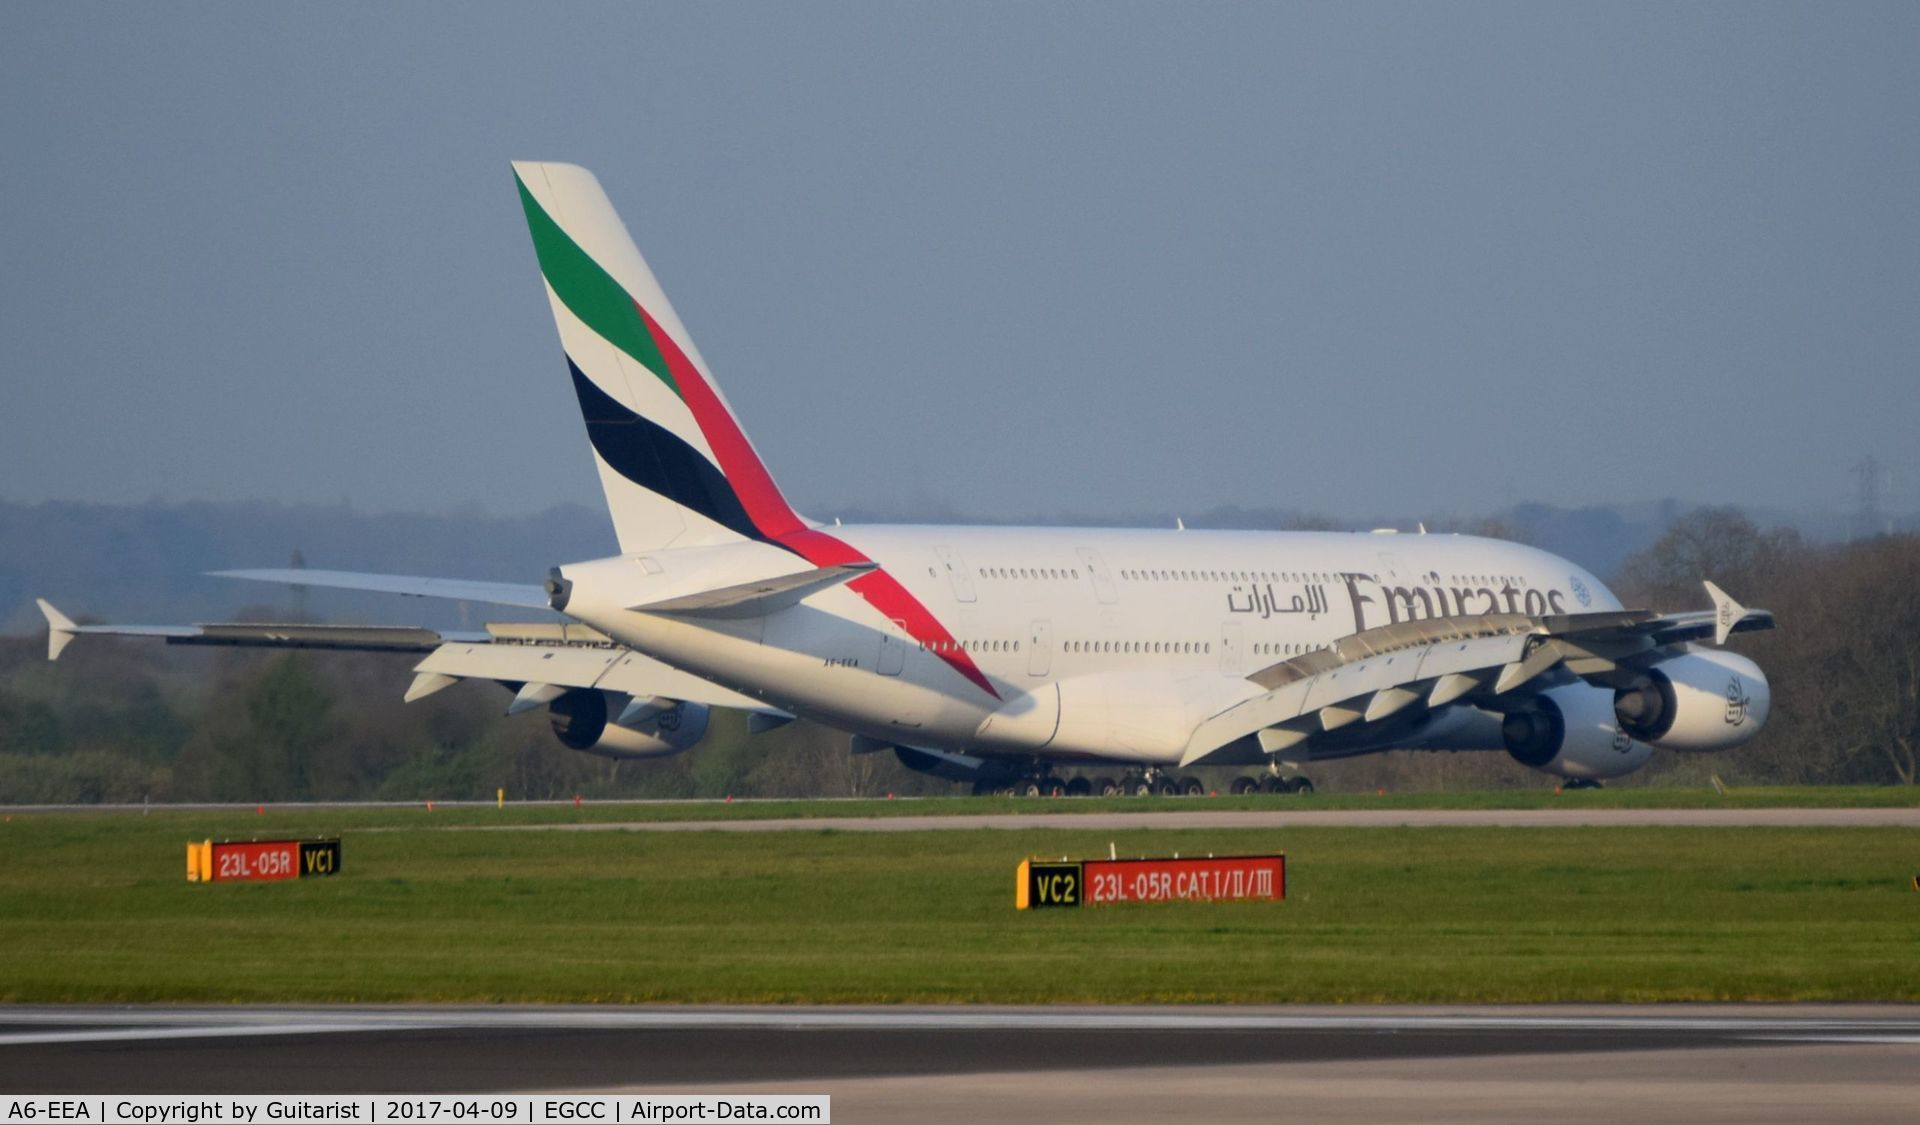 A6-EEA, 2012 Airbus A380-861 C/N 108, At Manchester